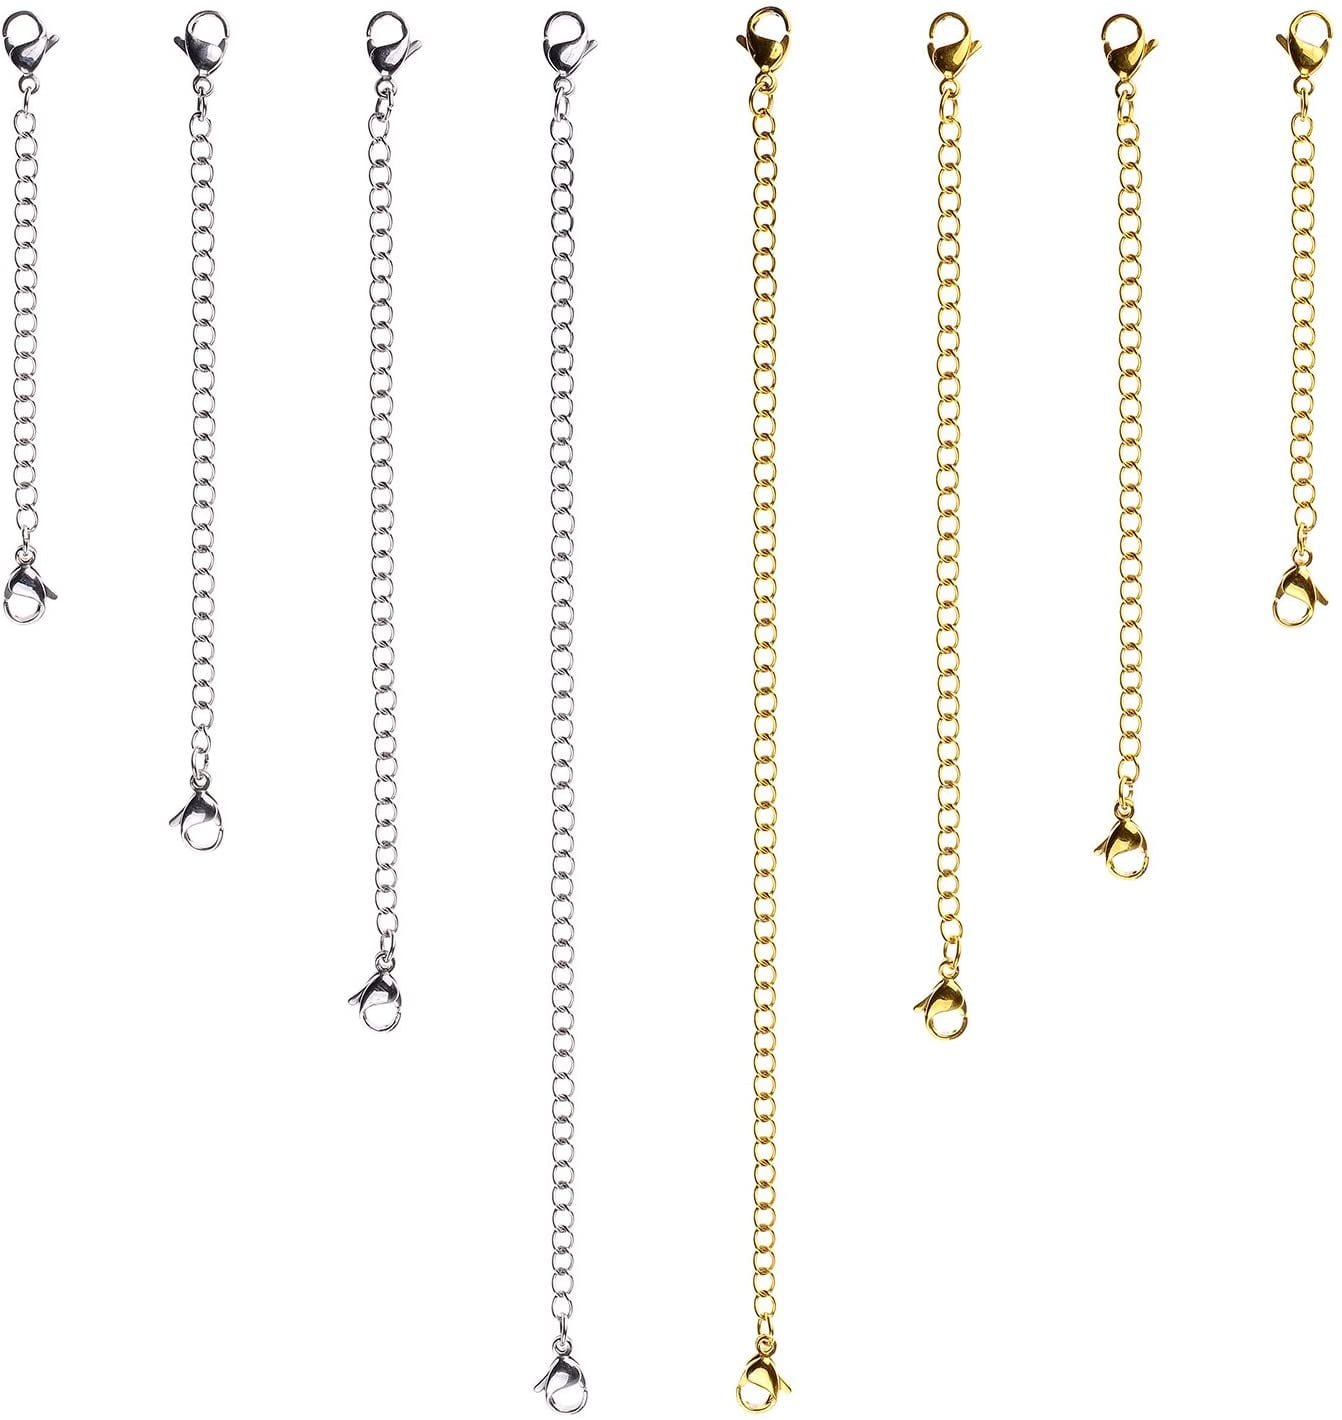  Necklace Extender, 12 PCS Chain Extenders for